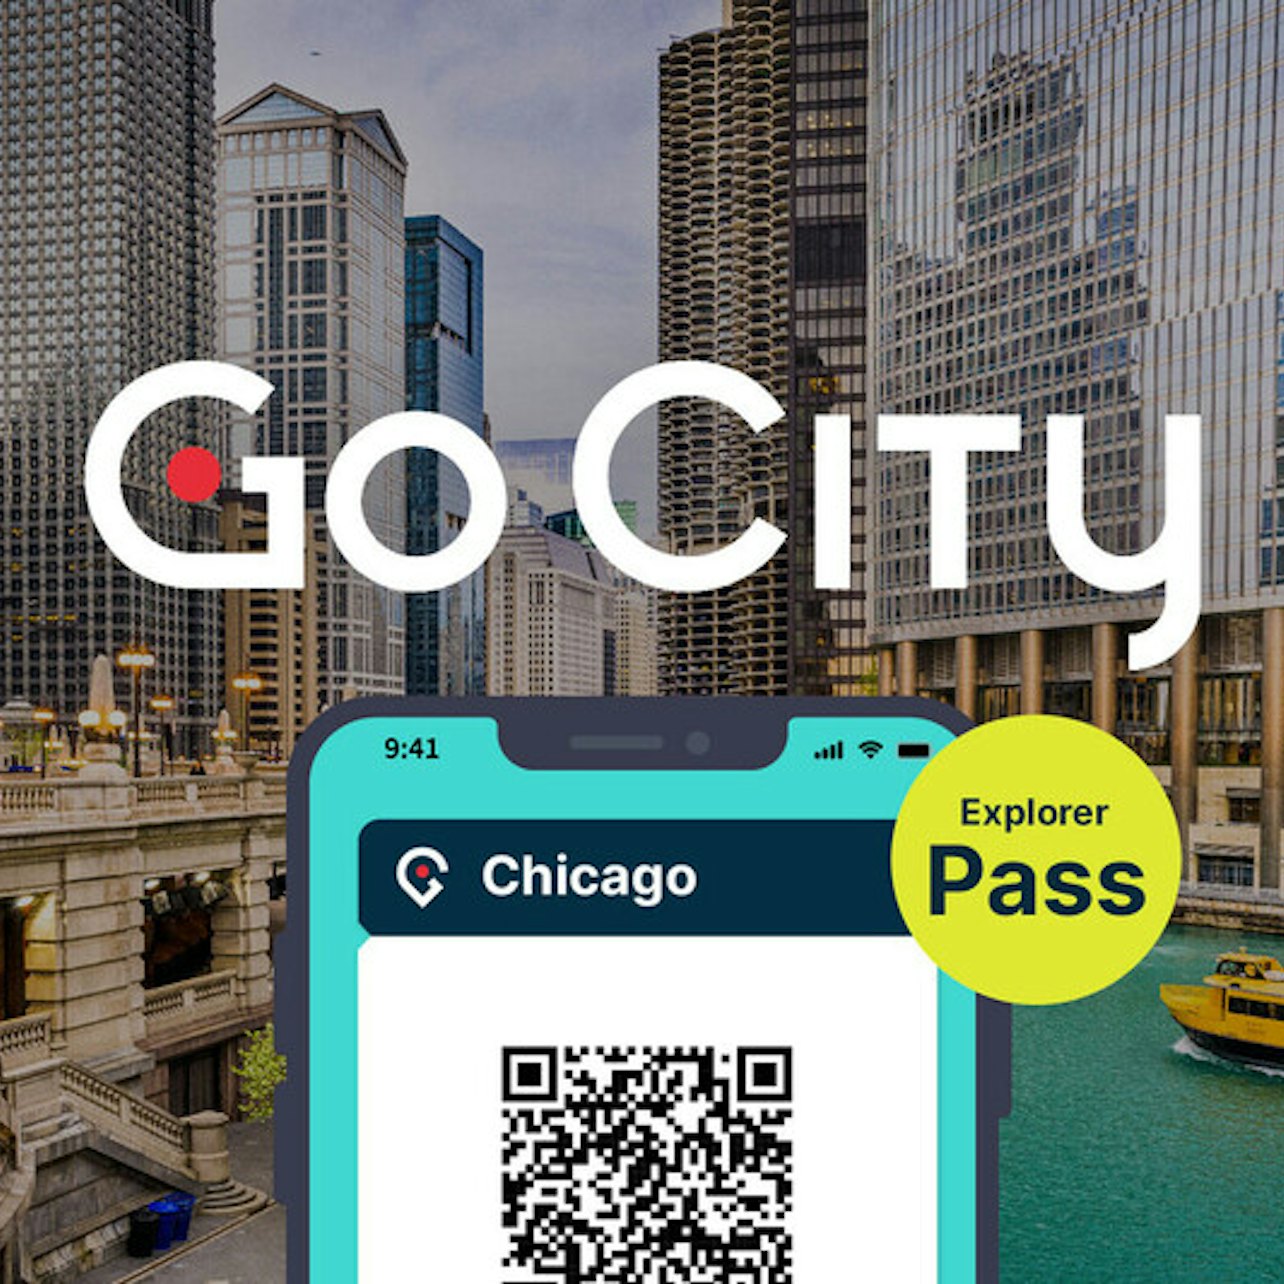 Go City Chicago: Explorer Pass - Accommodations in Chicago